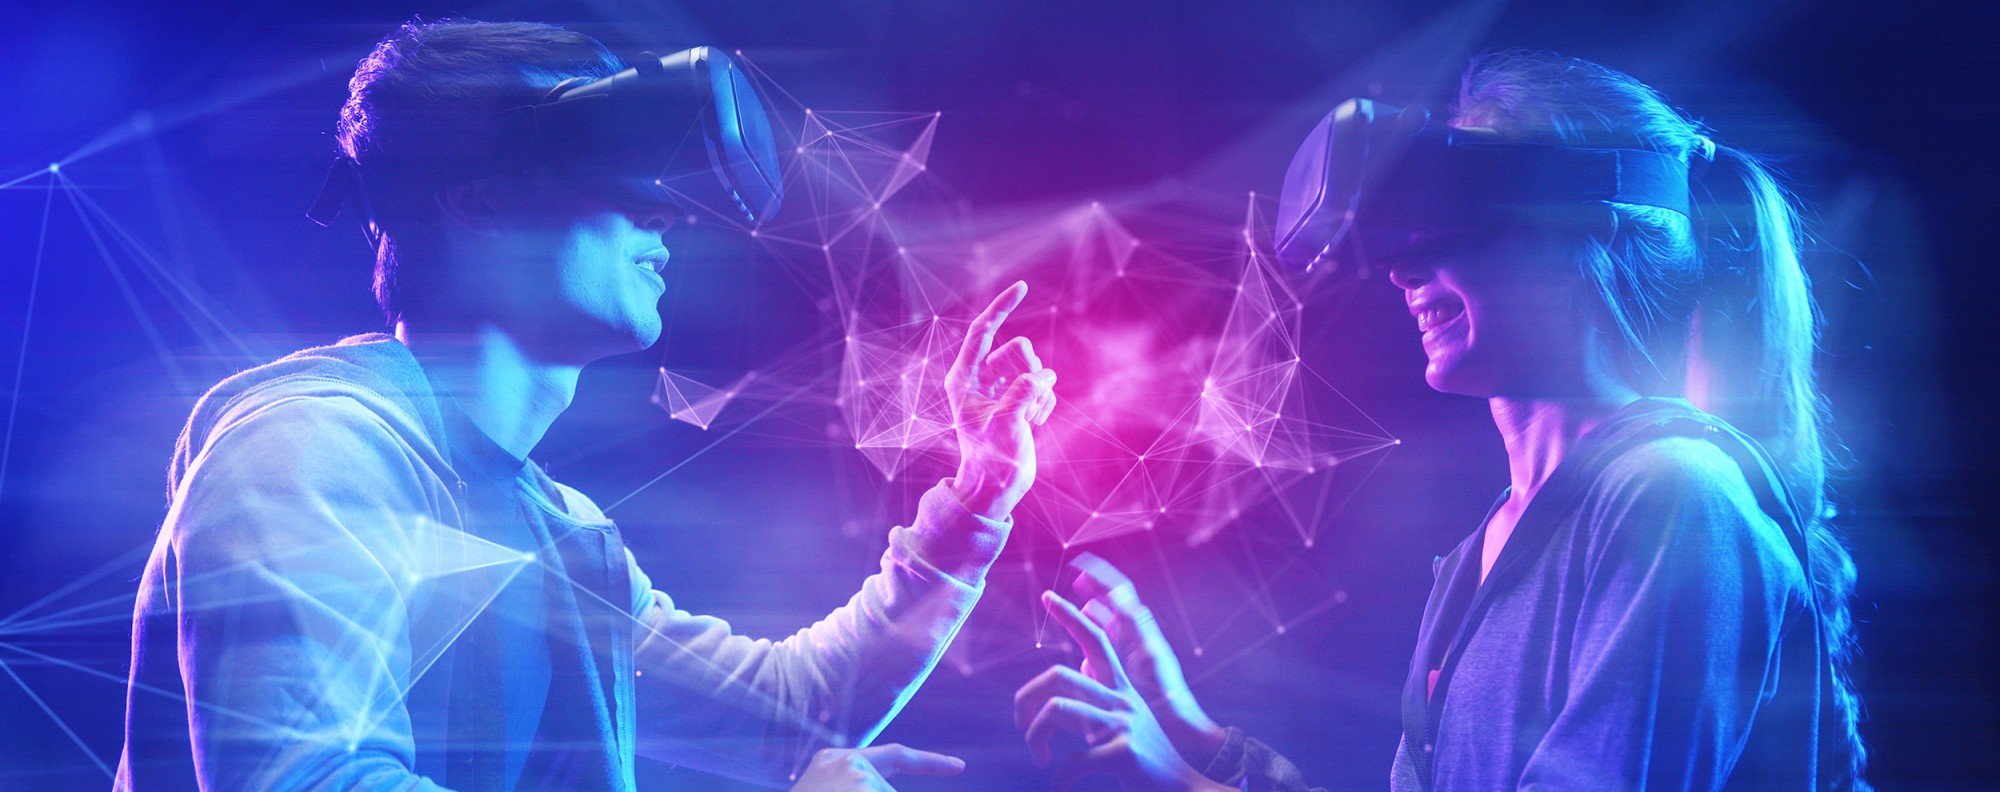 Teenagers playing games using virtual reality goggles. Photo: Shutterstock